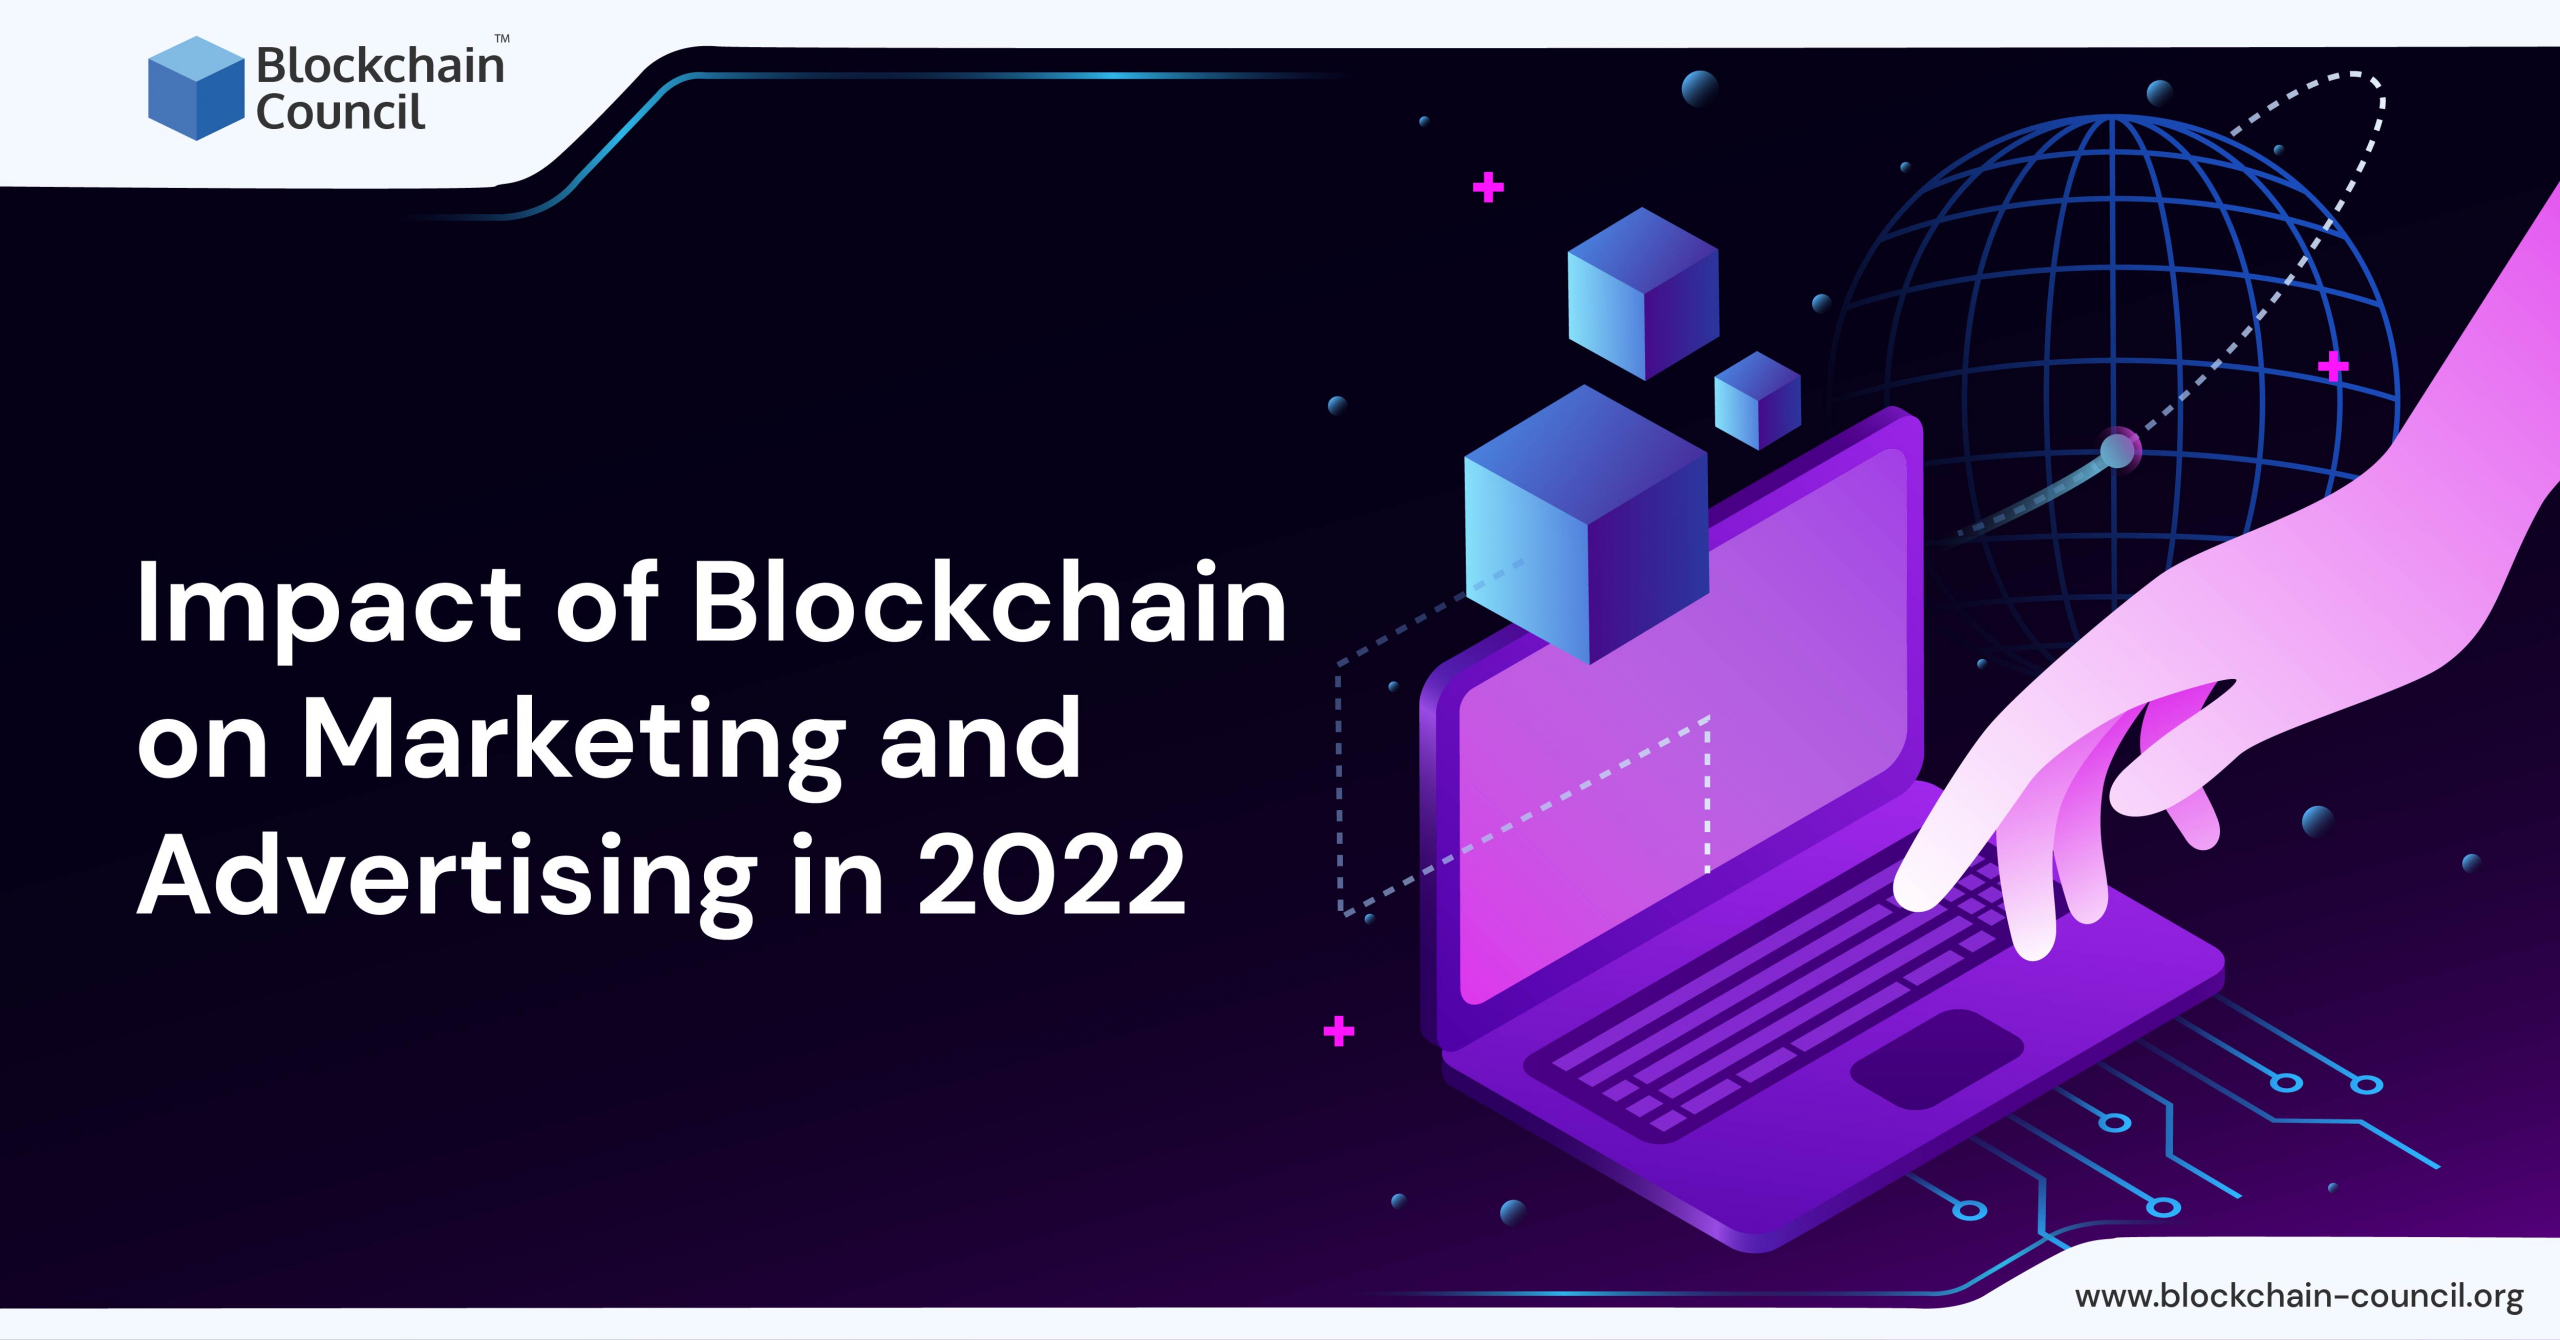 Impact of Blockchain on Marketing and Advertising in 2022